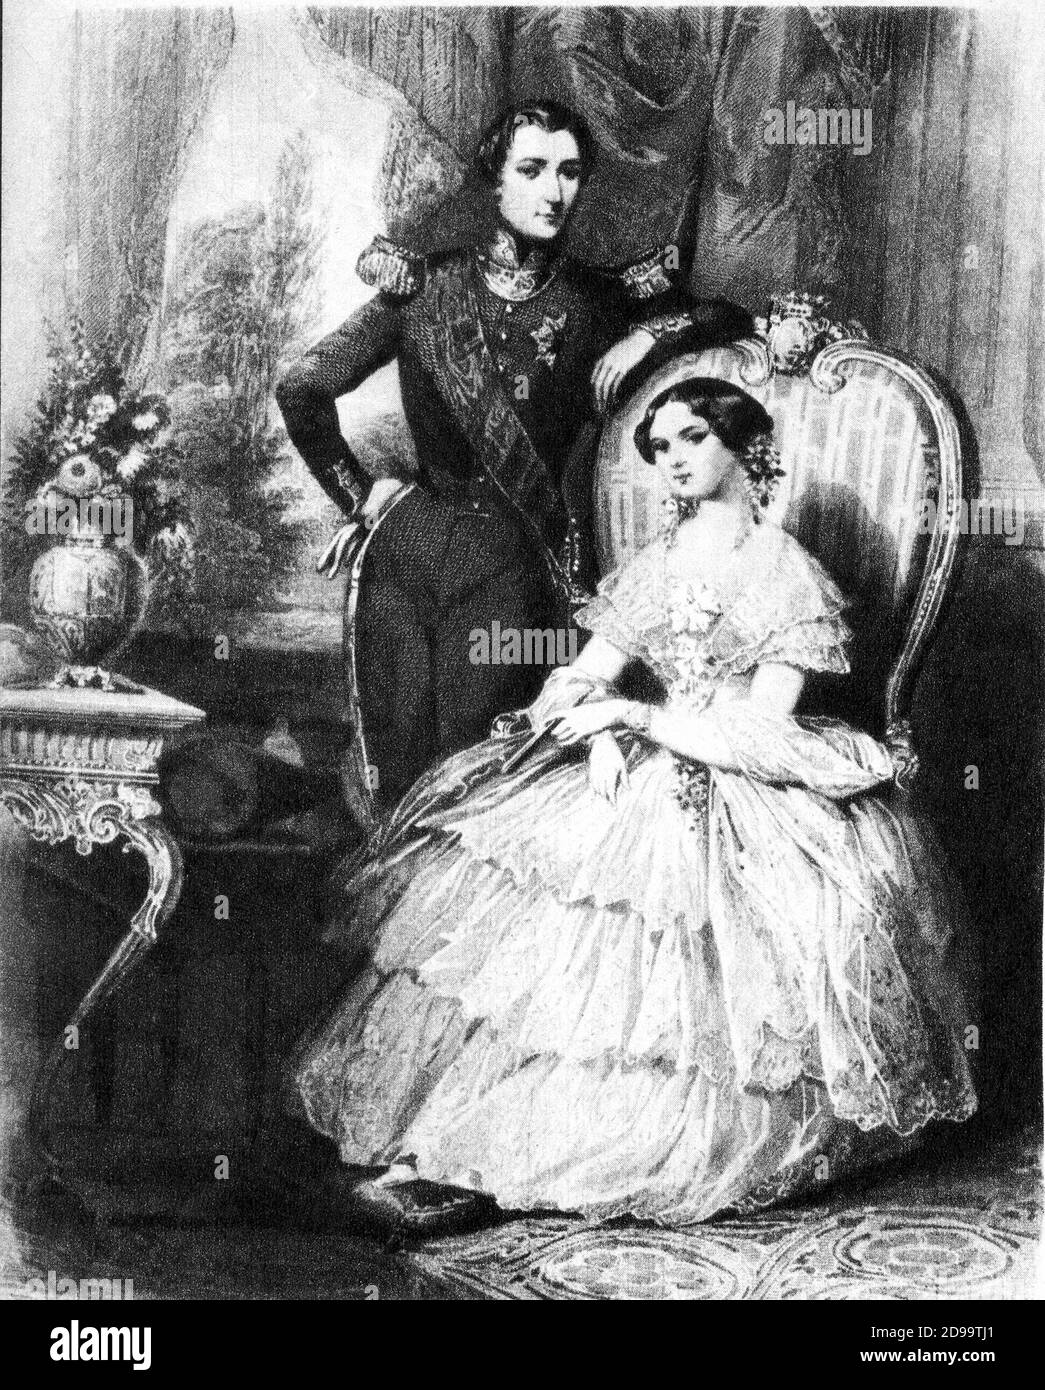 The young  Ducke of Brabant Leopold , future King of Belgium  LEOPOLD  II (  1835 -  1909 ) , with the wife Marie Henriette ABSBURG  Archduckesse of Austria , creator of african State of Congo ( 1884 ) , belgian colony from 1908 - official portrait engraving - BRABANTE - BELGIO - ROYALTY - REALI - Nobili - nobility - nobiltà - divisa militare - military uniform  - chignon - scialle - shawl - pizzo - lace - LEOPOLDO II  - ASBURGO - ASBURG ----  Archivio GBB Stock Photo